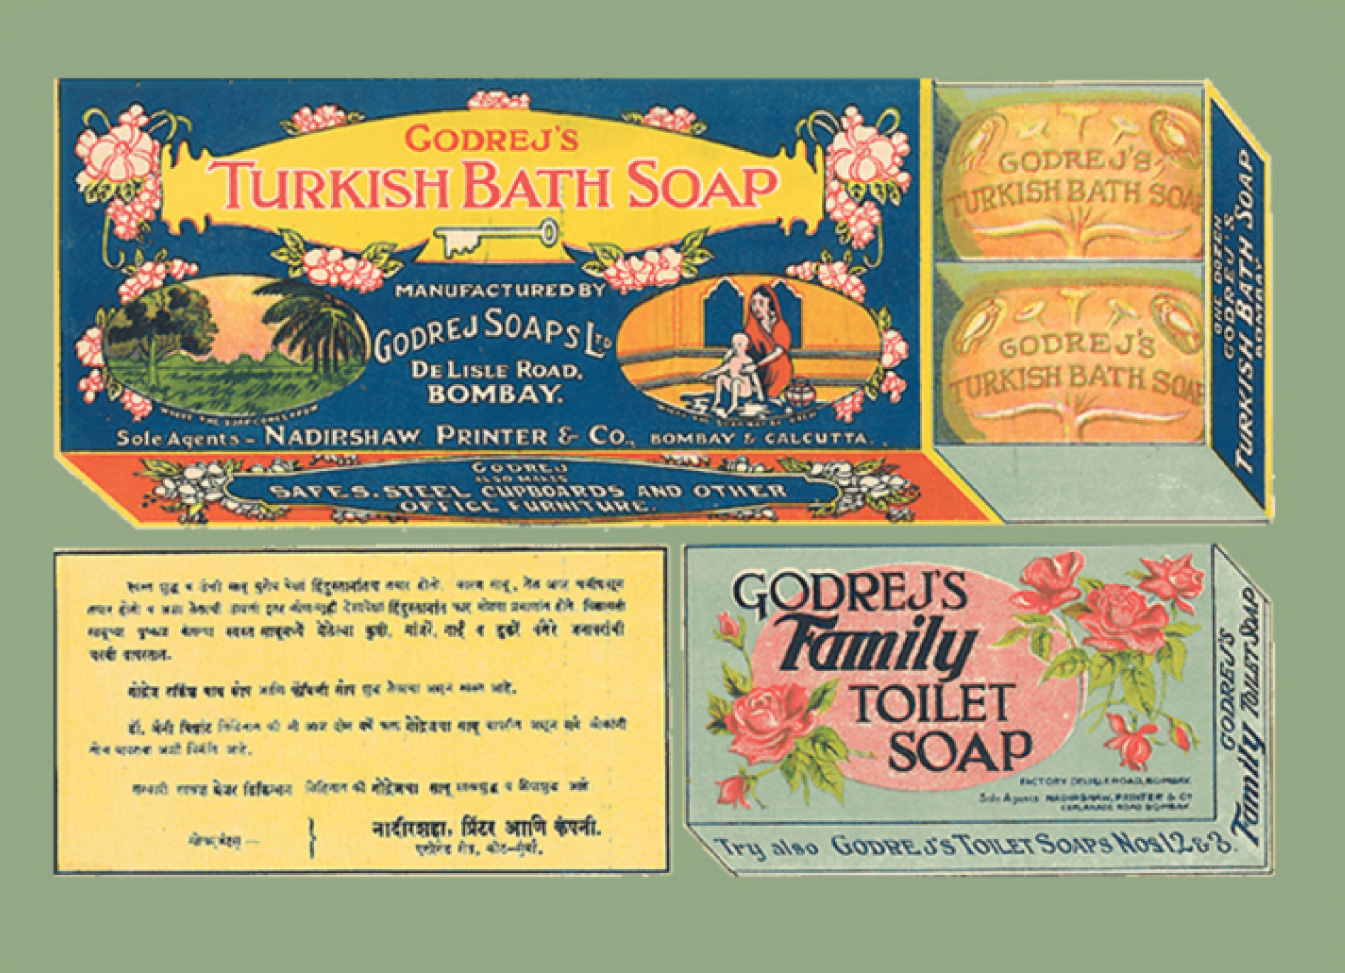 World's first vegetable oil soap